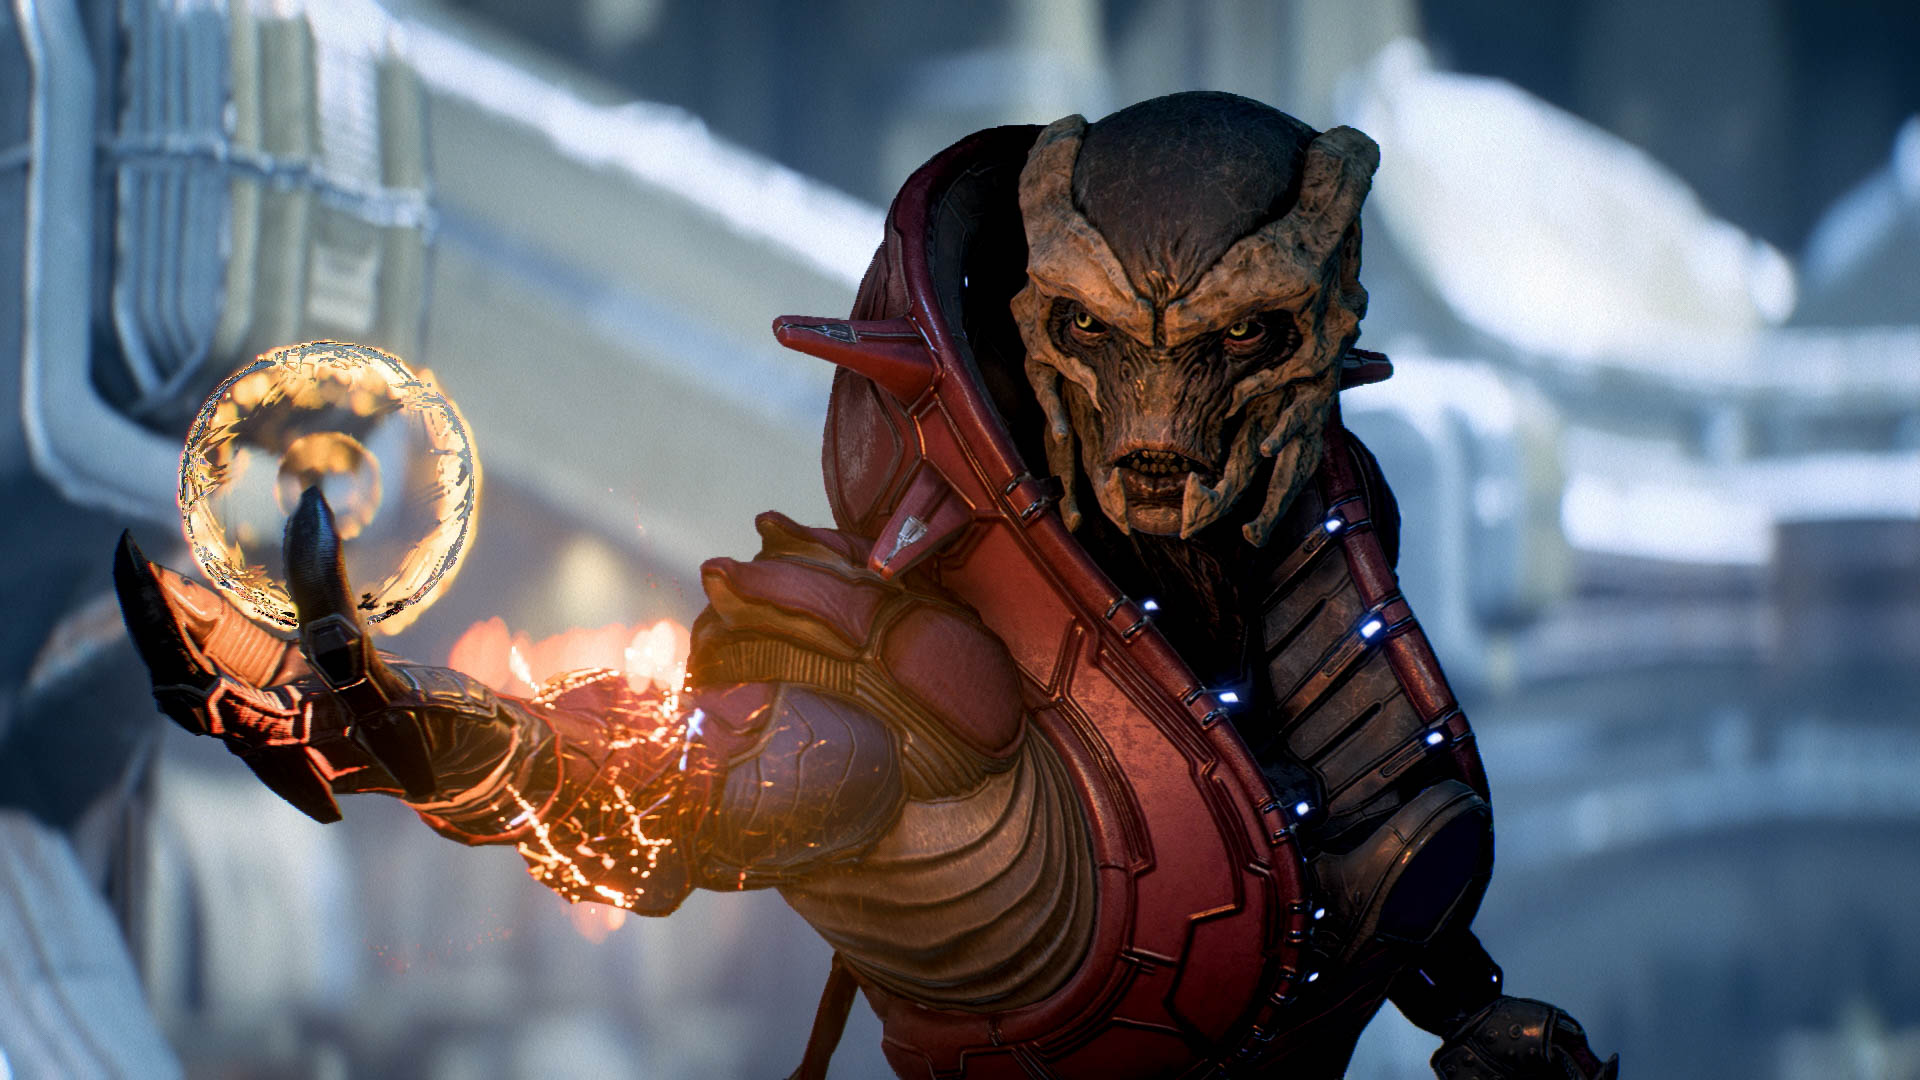 Mass Effect Andromeda Review A Return To Bioware’s Space Opera